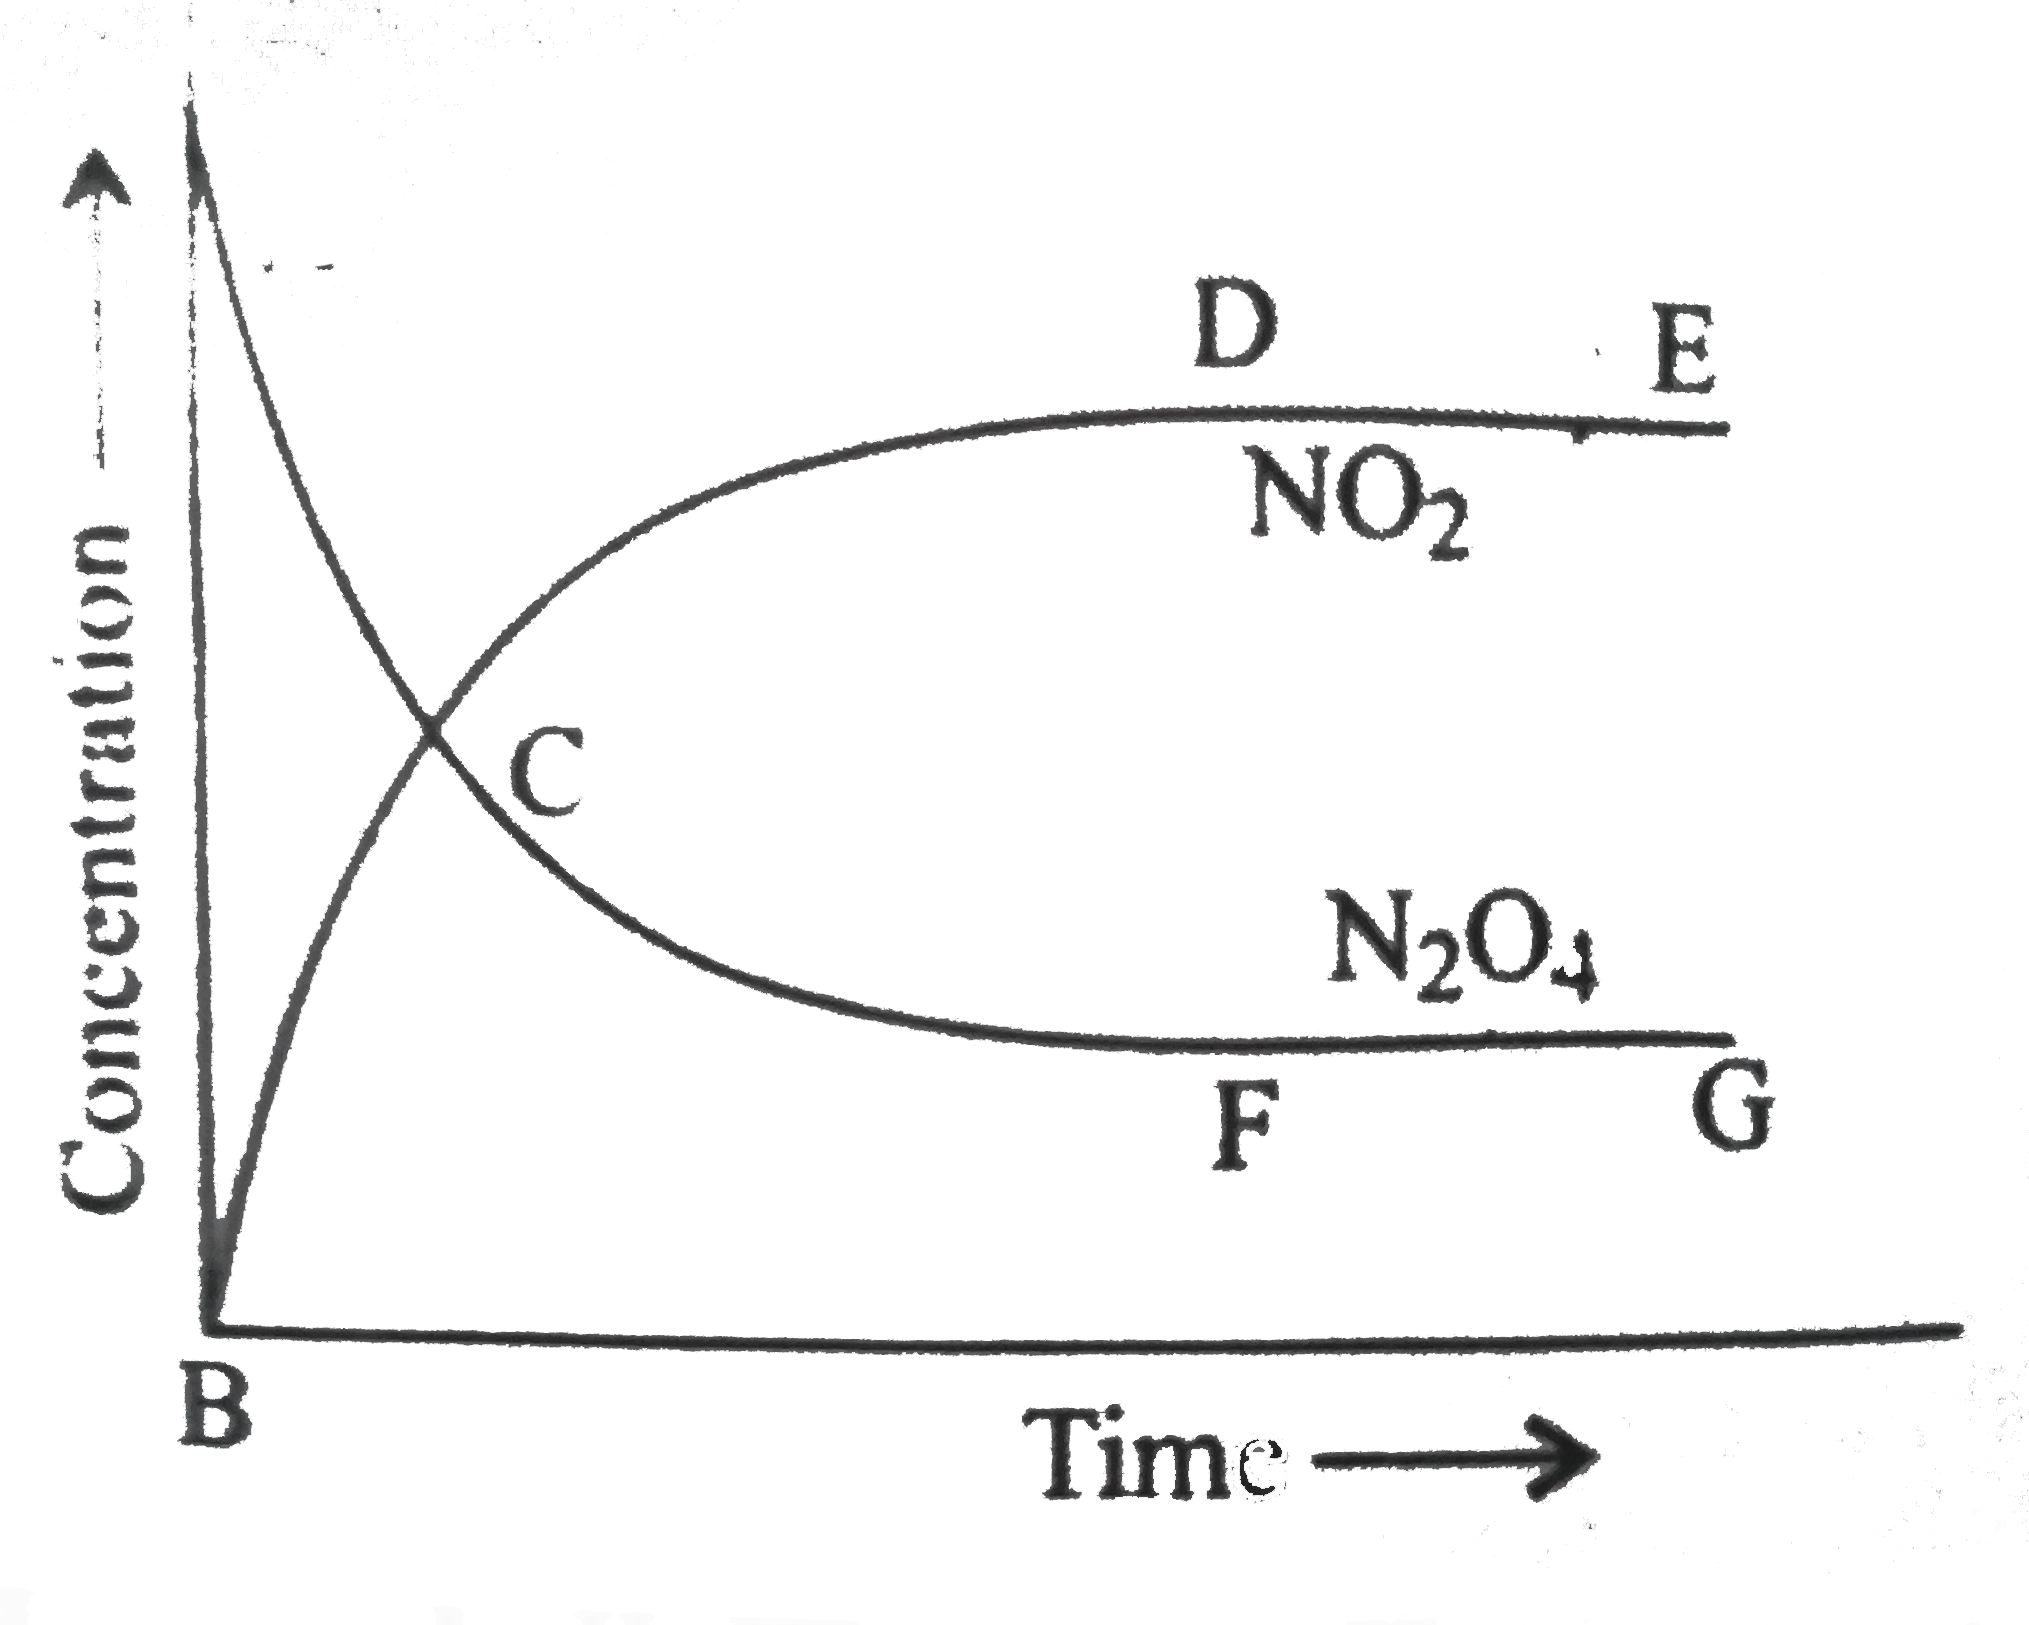 N(2)O(4) hArr 2NO(2), K(c)=4. This reversible reaction is studied graphically as shown in the figure. Select the correct statement out of I, II and III.   I : Reaction quotient has maximum value at point A   II : Reaction proceeds left to right at a point when [N(2)O(4)]=[NO(2)]=0.1 M   III : K=Q when point D or F is reached: